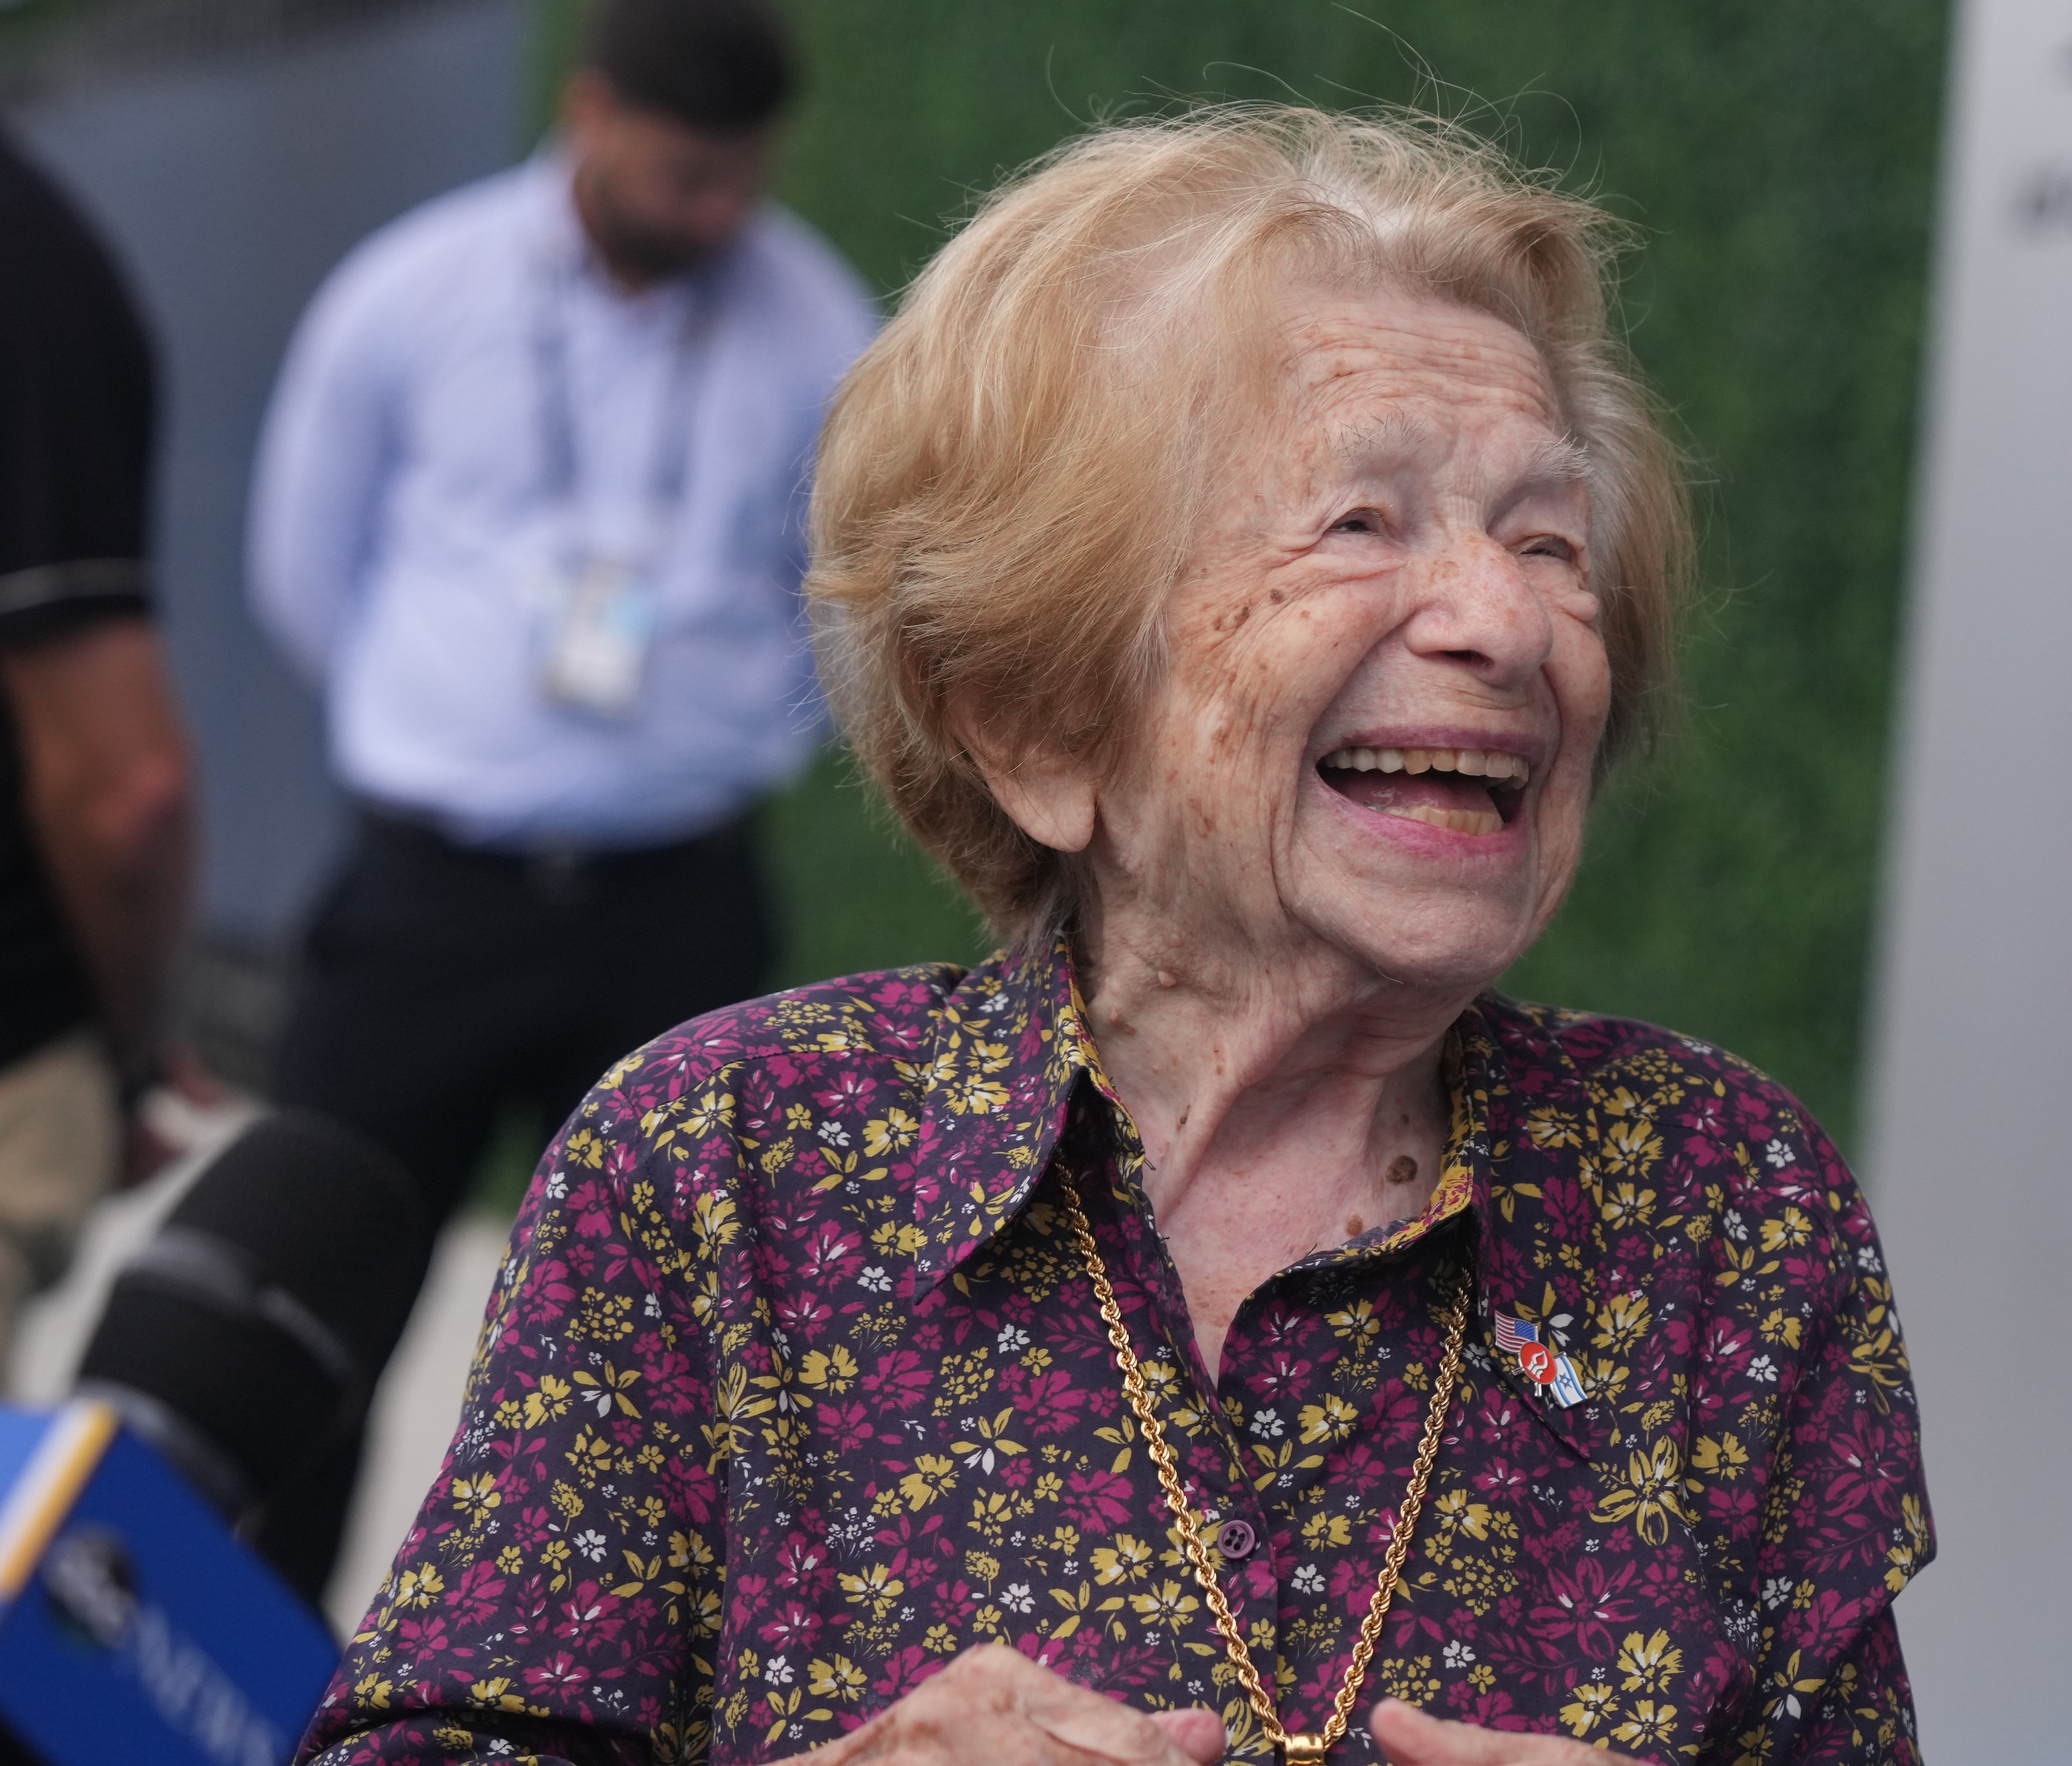 Famous sex therapist Dr. Ruth dies at age 96 in NYC